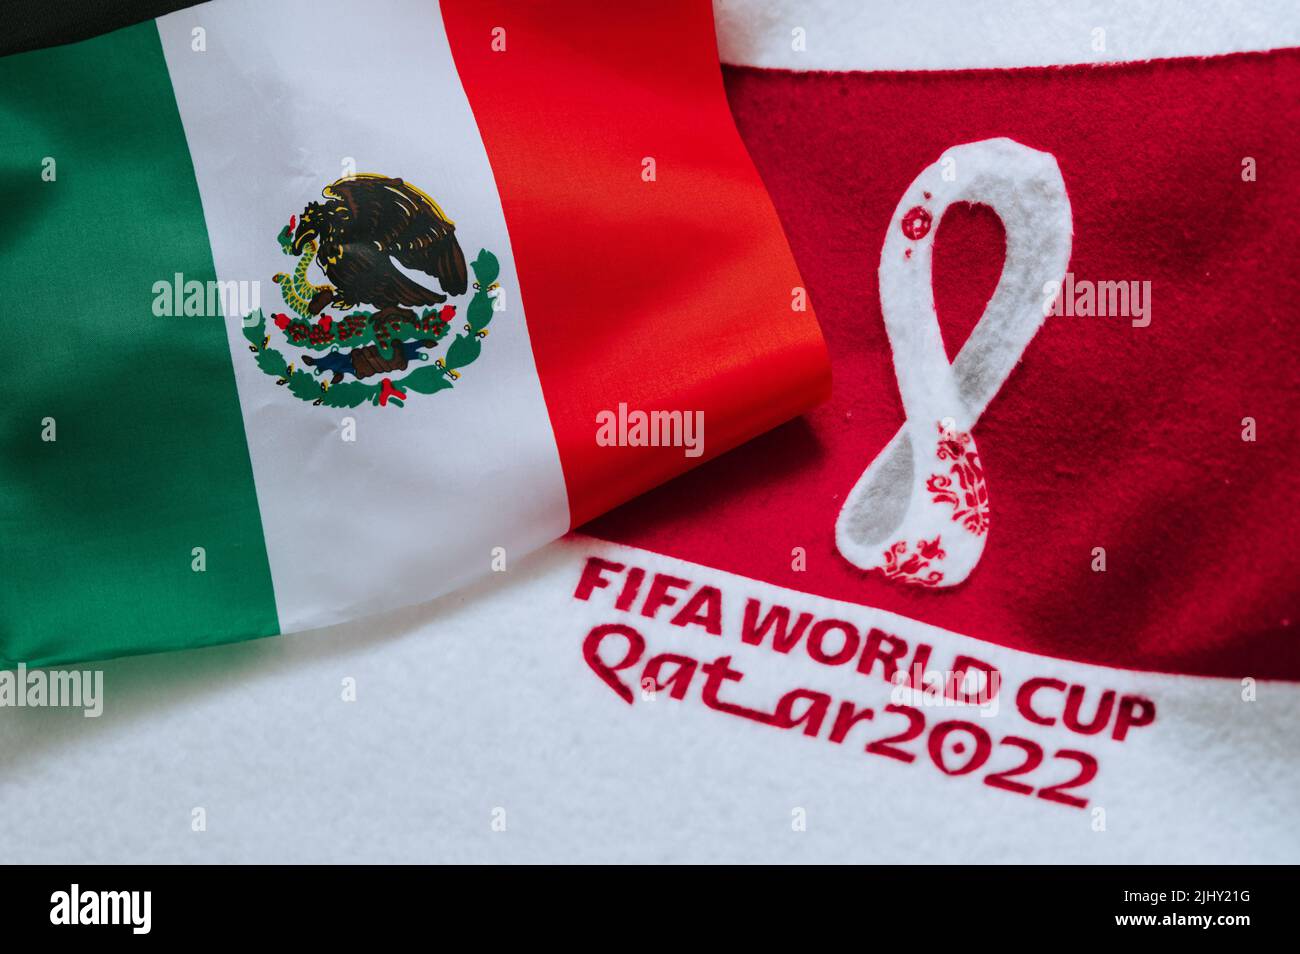 QATAR, DOHA, 18 JULY, 2022: Mexico National flag and logo of FIFA World Cup in Qatar 2022 on red carpet. Soccer sport background, edit space. Qatar 22 Stock Photo